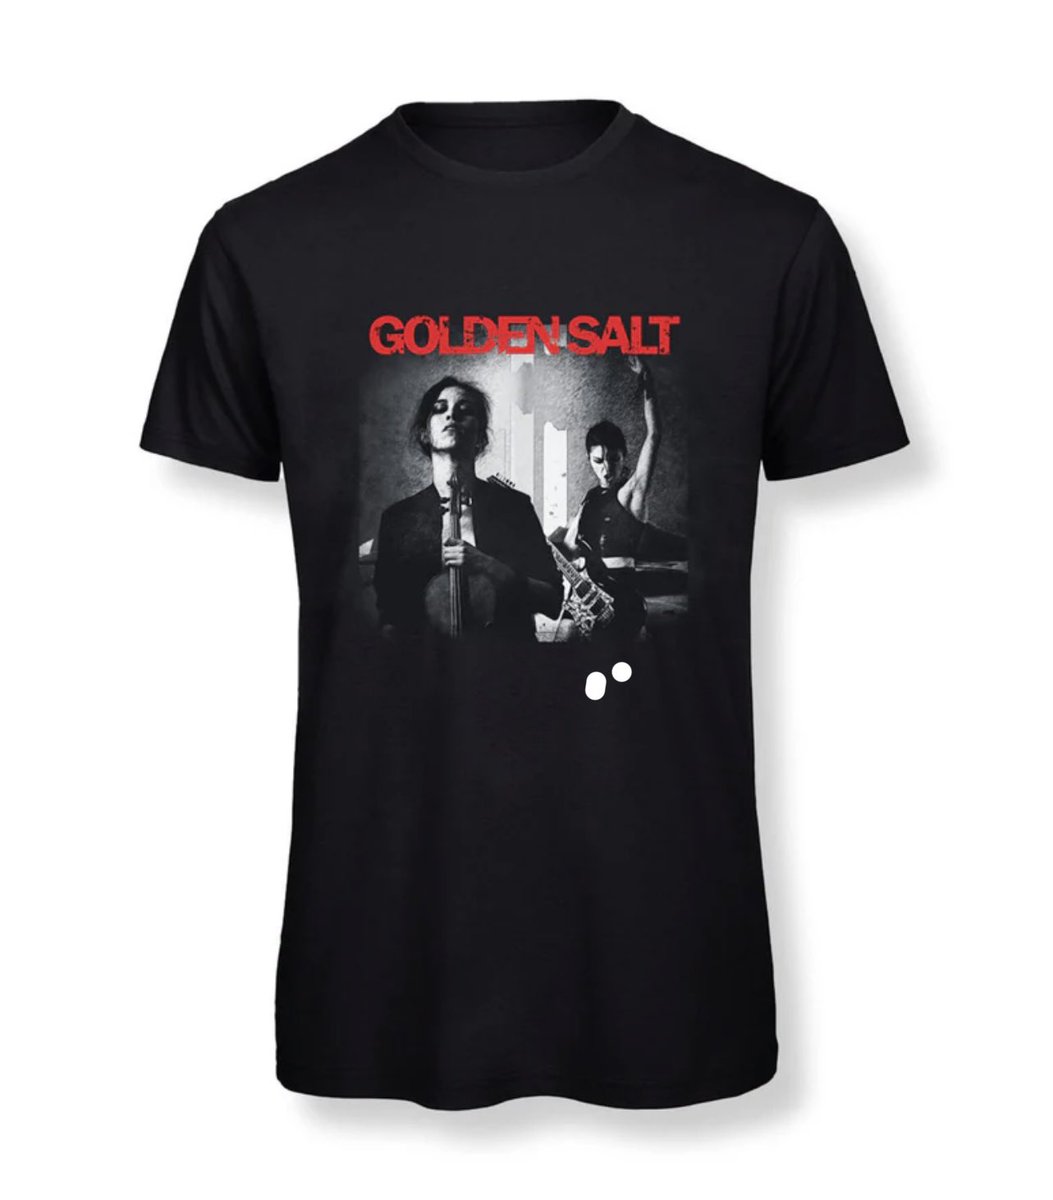 The rock t-shirts are almost sold out at the Golden Salt Shop: goldensaltshop.com Vinyls are currently on offer and are also running out quickly... Thank you for supporting us with this enthusiasm worldwide! 🎻🎸🔥 #goldensalt